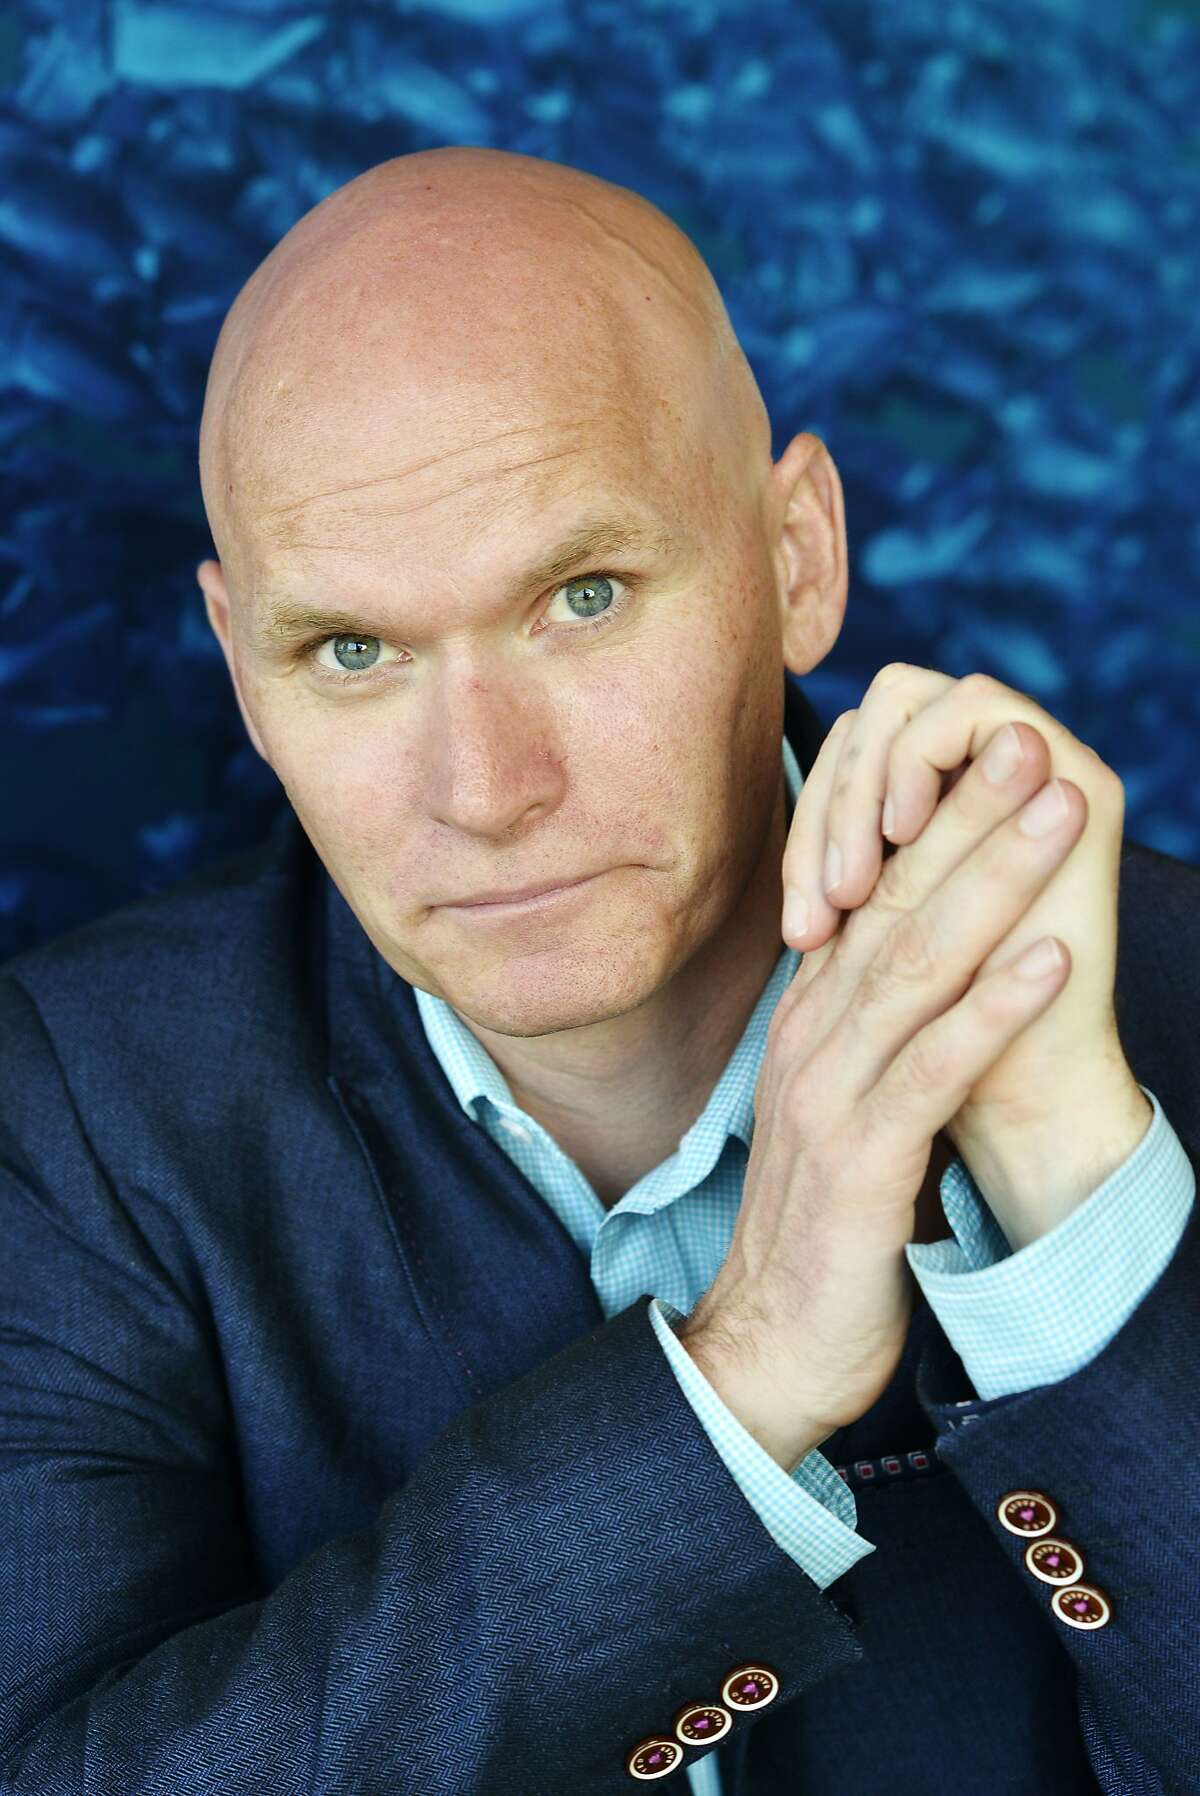 SAINT MALO, FRANCE - MAY 25: American writer Anthony Doerr poses during a portrait session held on May 25, 2015 in Saint Malo, France. (Photo by Ulf Andersen/Getty Images)